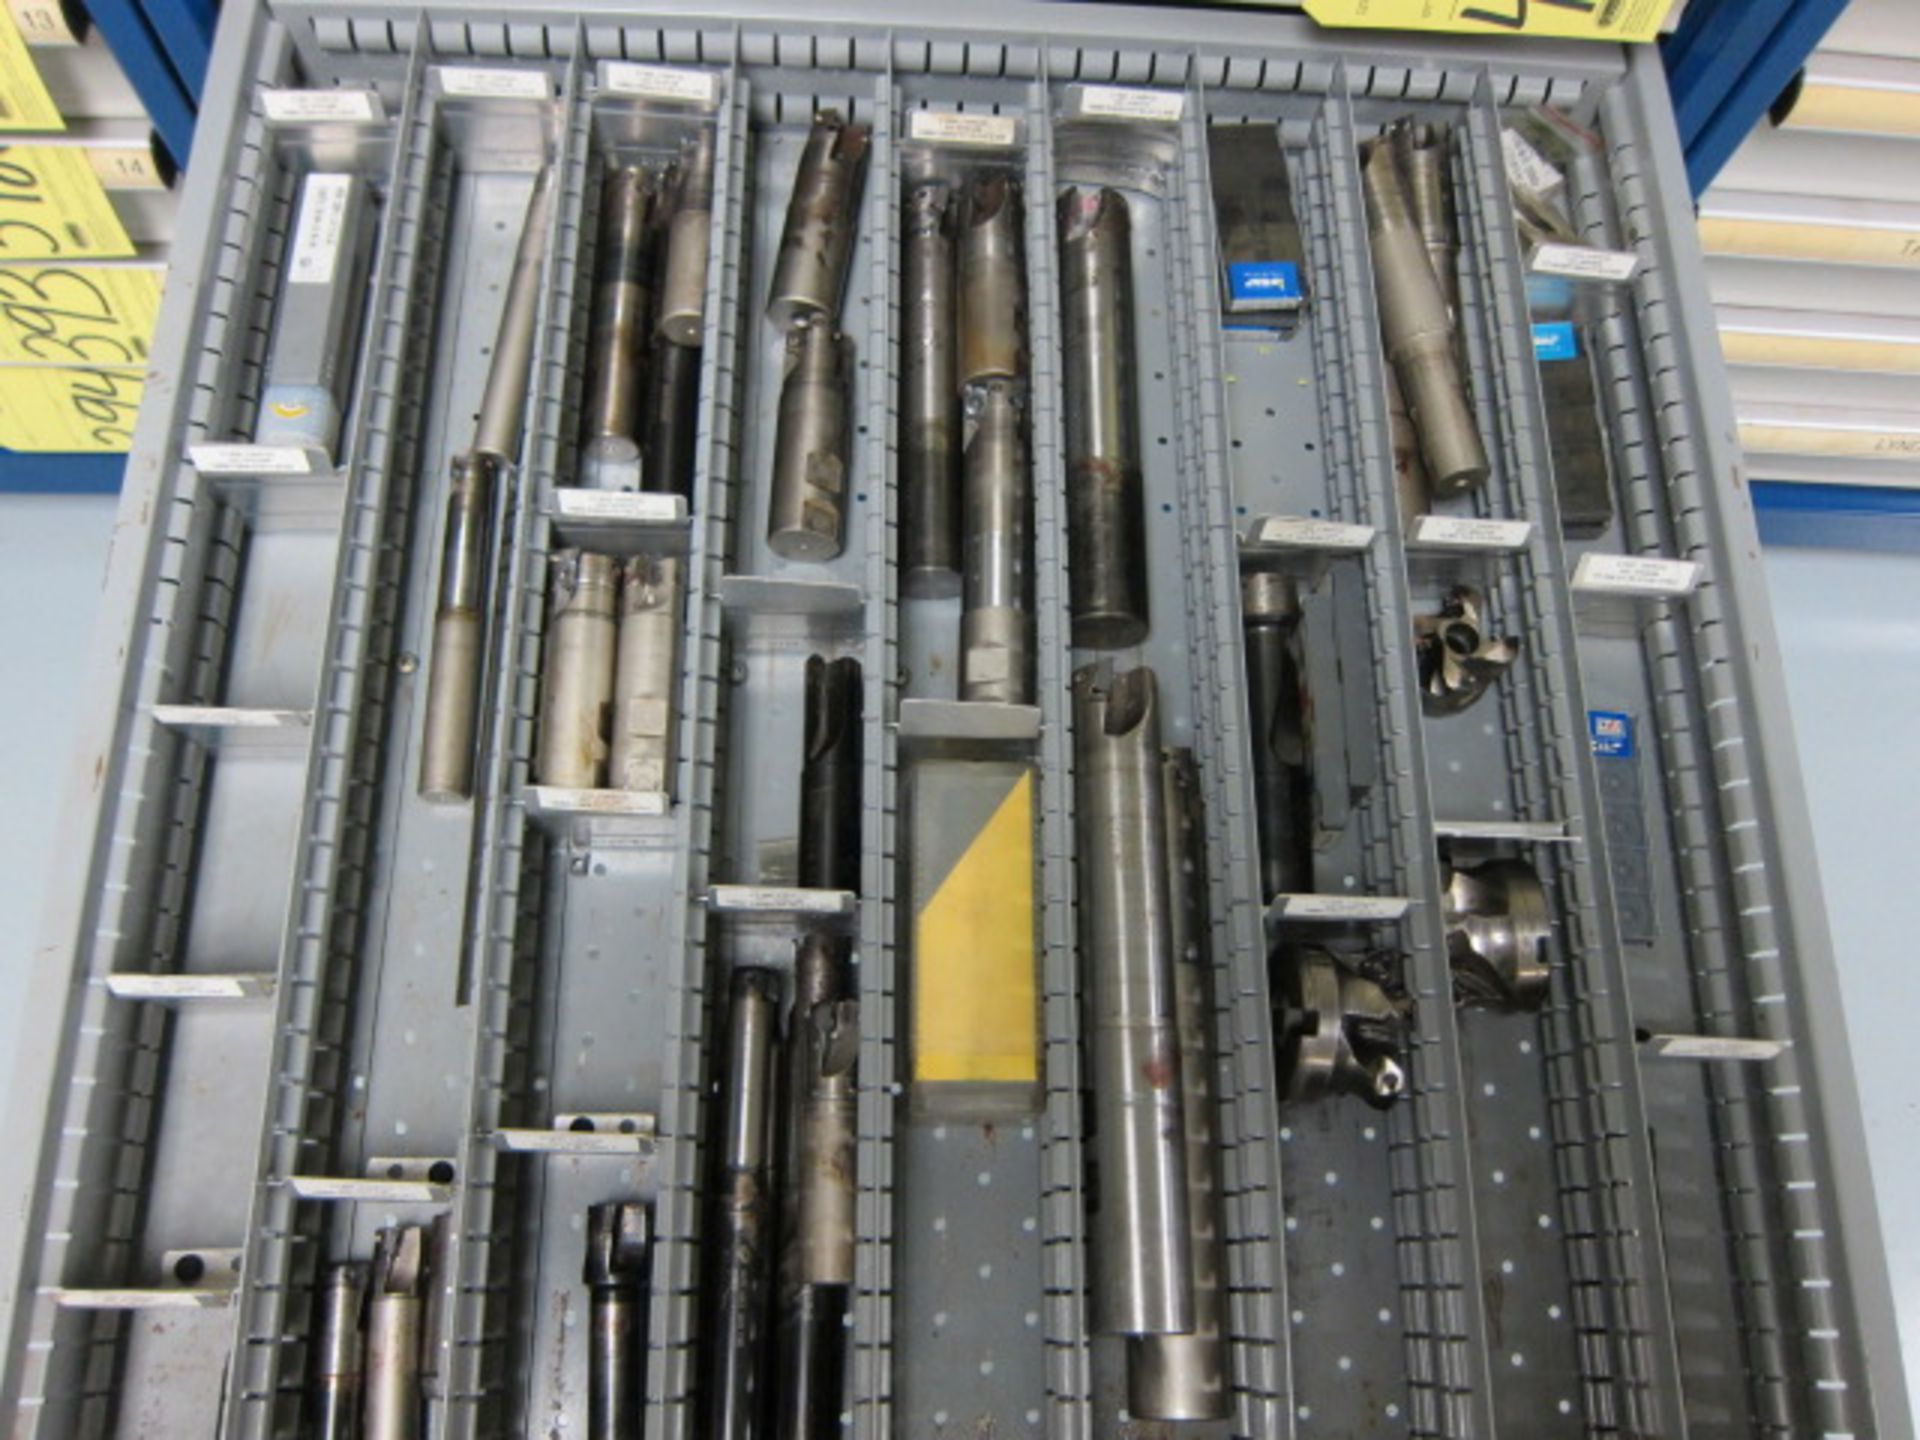 LOT OF INSERT ENDMILL CUTTERS, assorted (in one drawer)